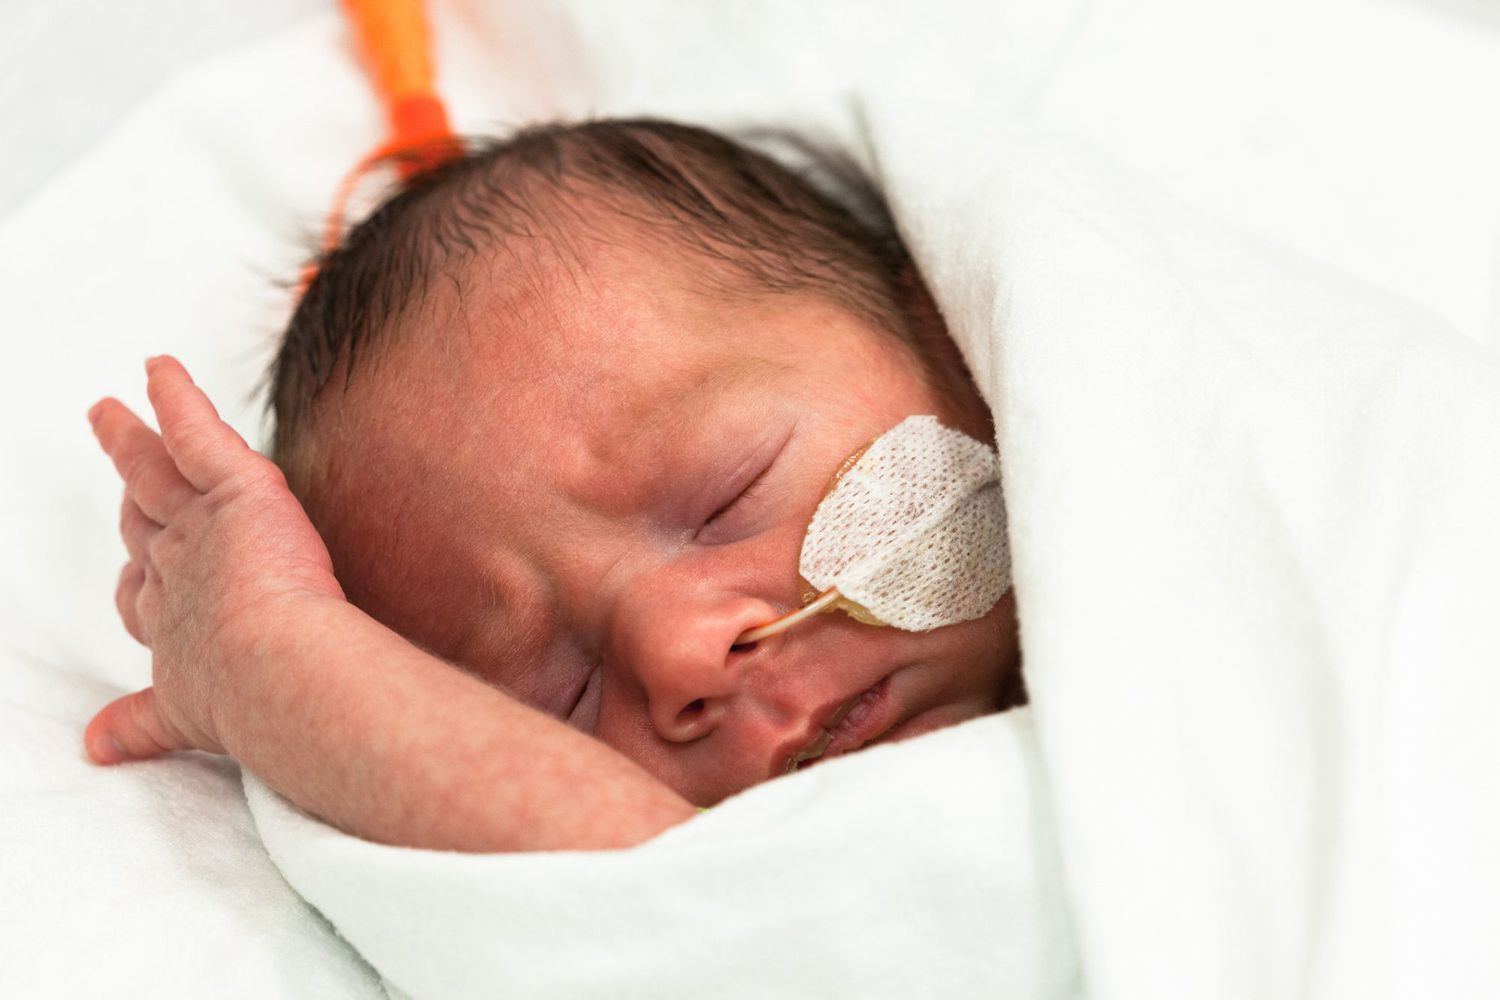 An image of a baby with a feeding tube.